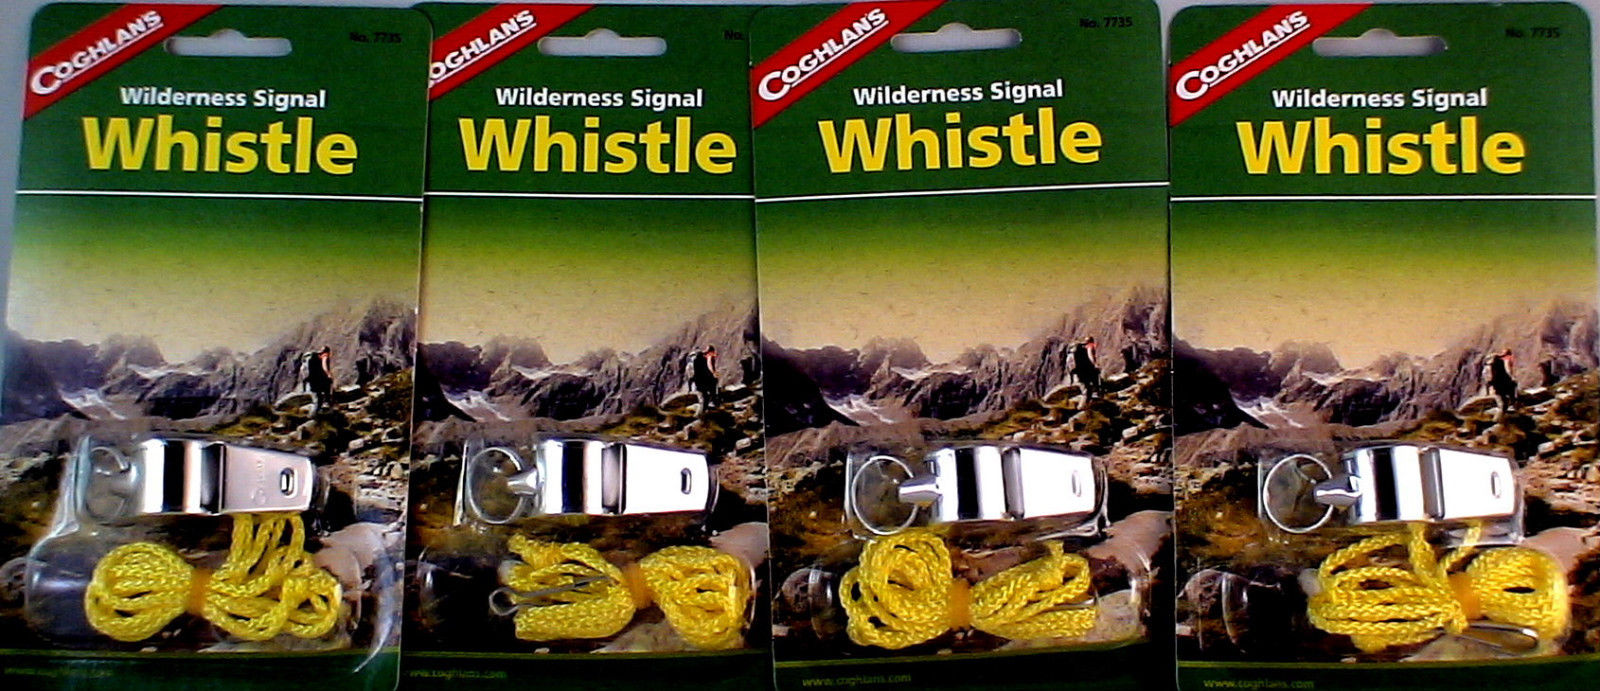 INCLUDES MORSE CODE GUIDE 2 PACK WILDERNESS SIGNAL WHISTLE-METAL WITH LANYARD 